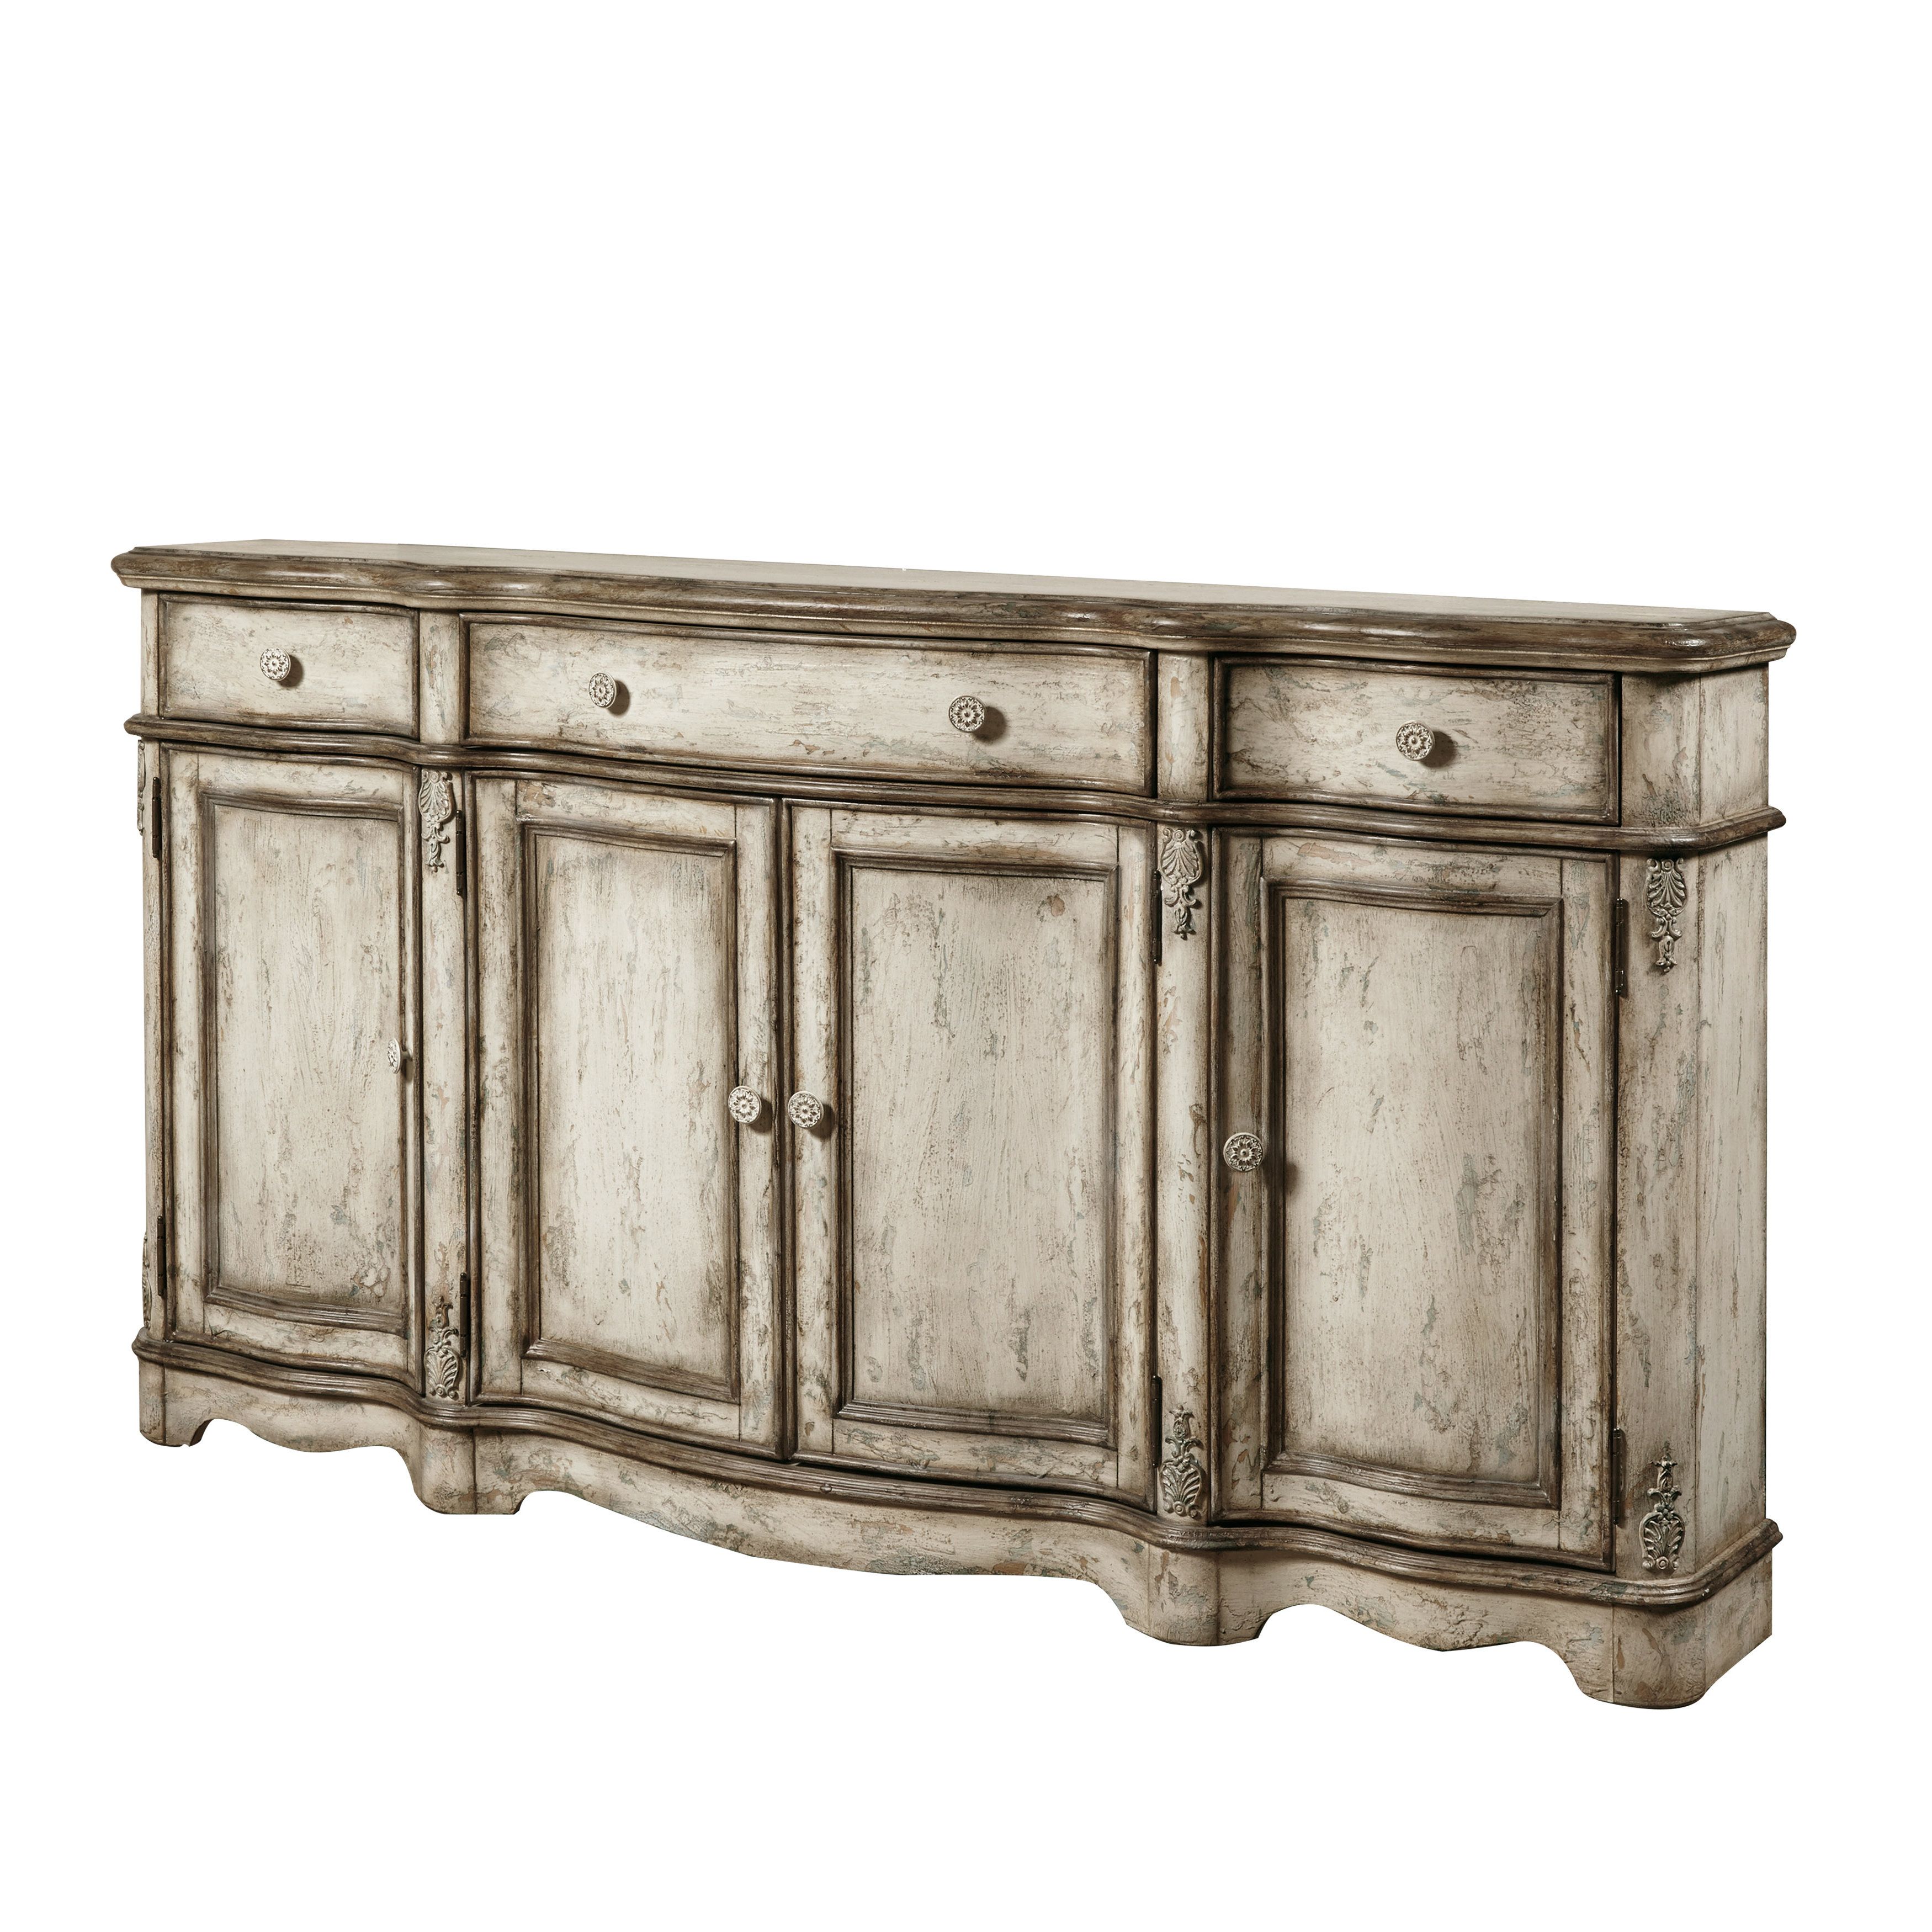 Farmhouse & Rustic Sideboards & Buffets | Birch Lane Regarding Most Up To Date Fugate 2 Door Credenzas (View 10 of 20)